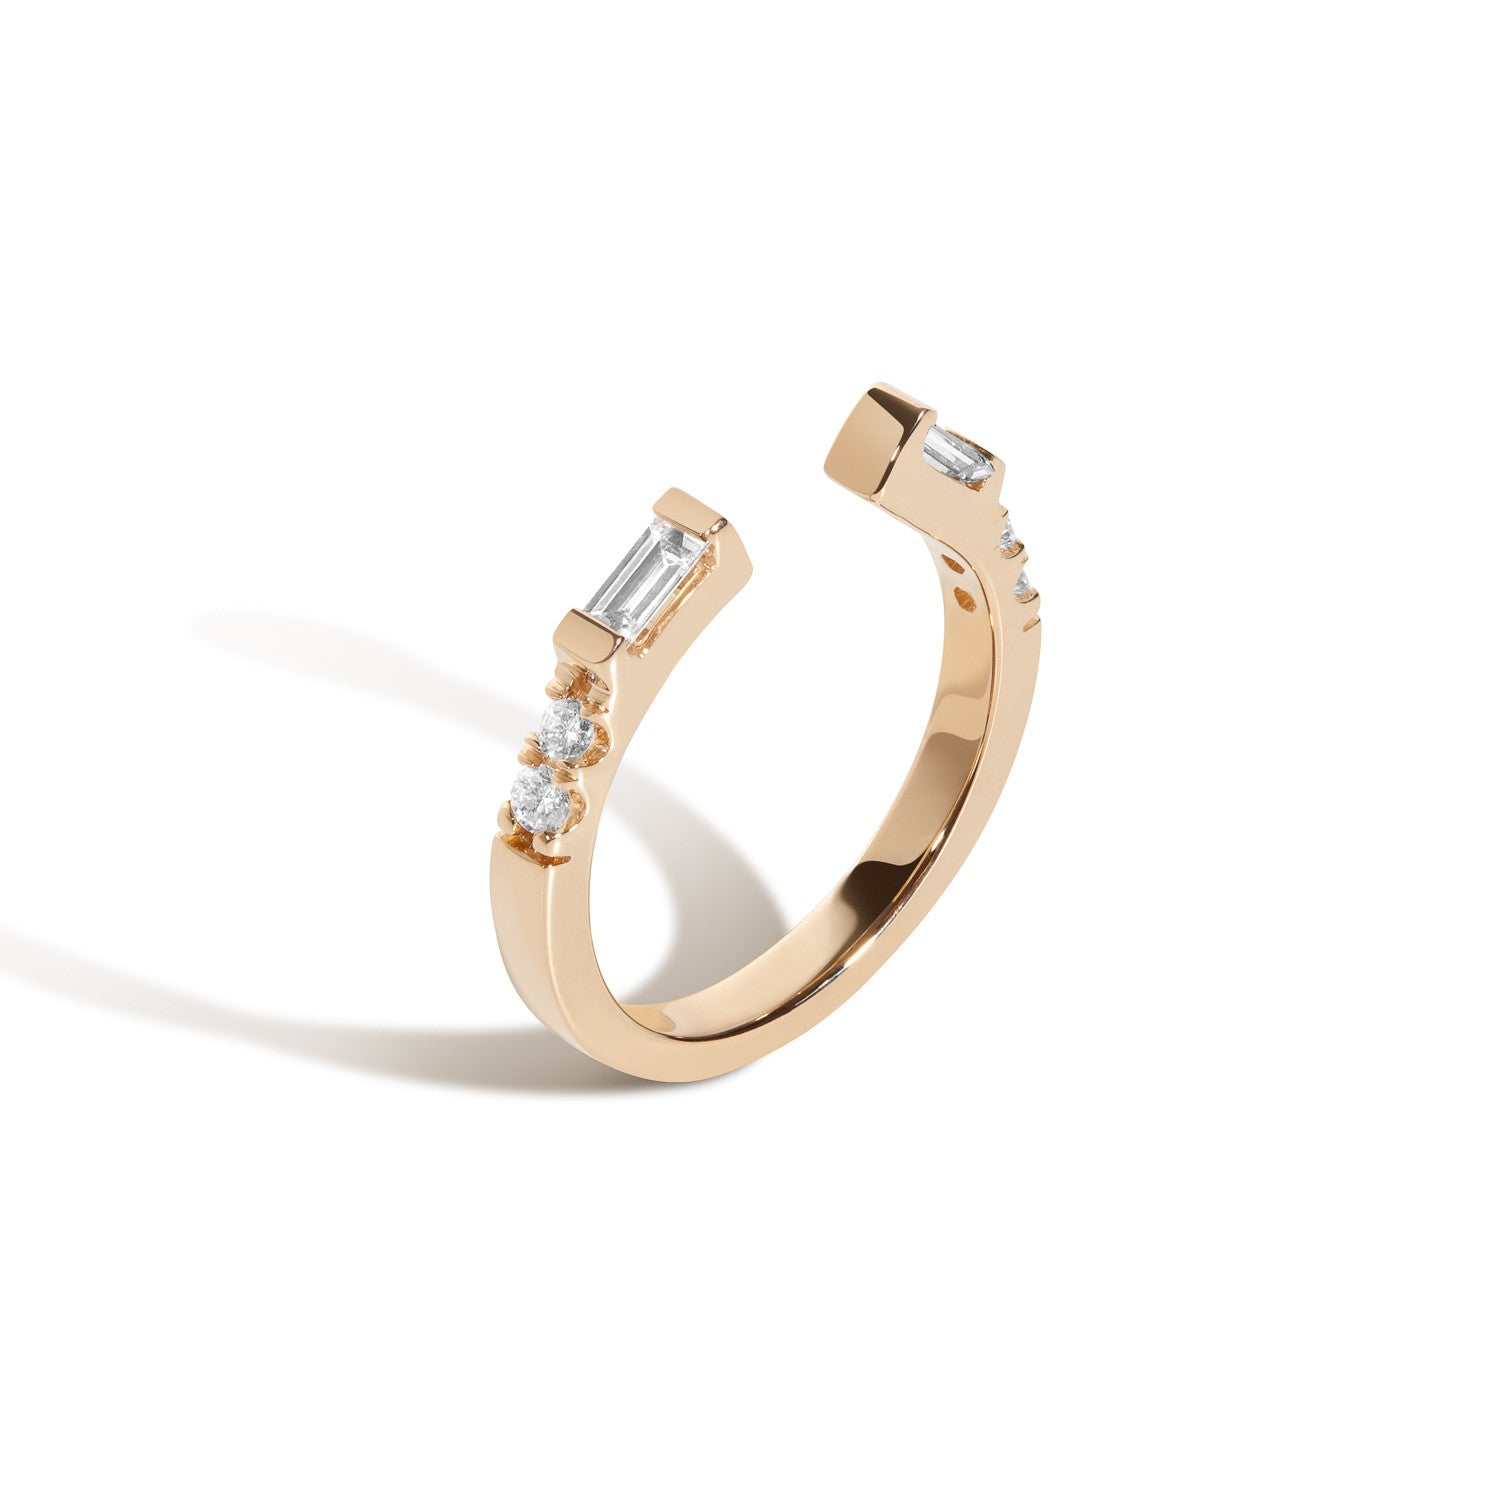 Shahla Karimi Jewelry 14/18K Yellow Gold Rockefeller No.2 Open Ring with Diamond Baguettes and White Diamonds